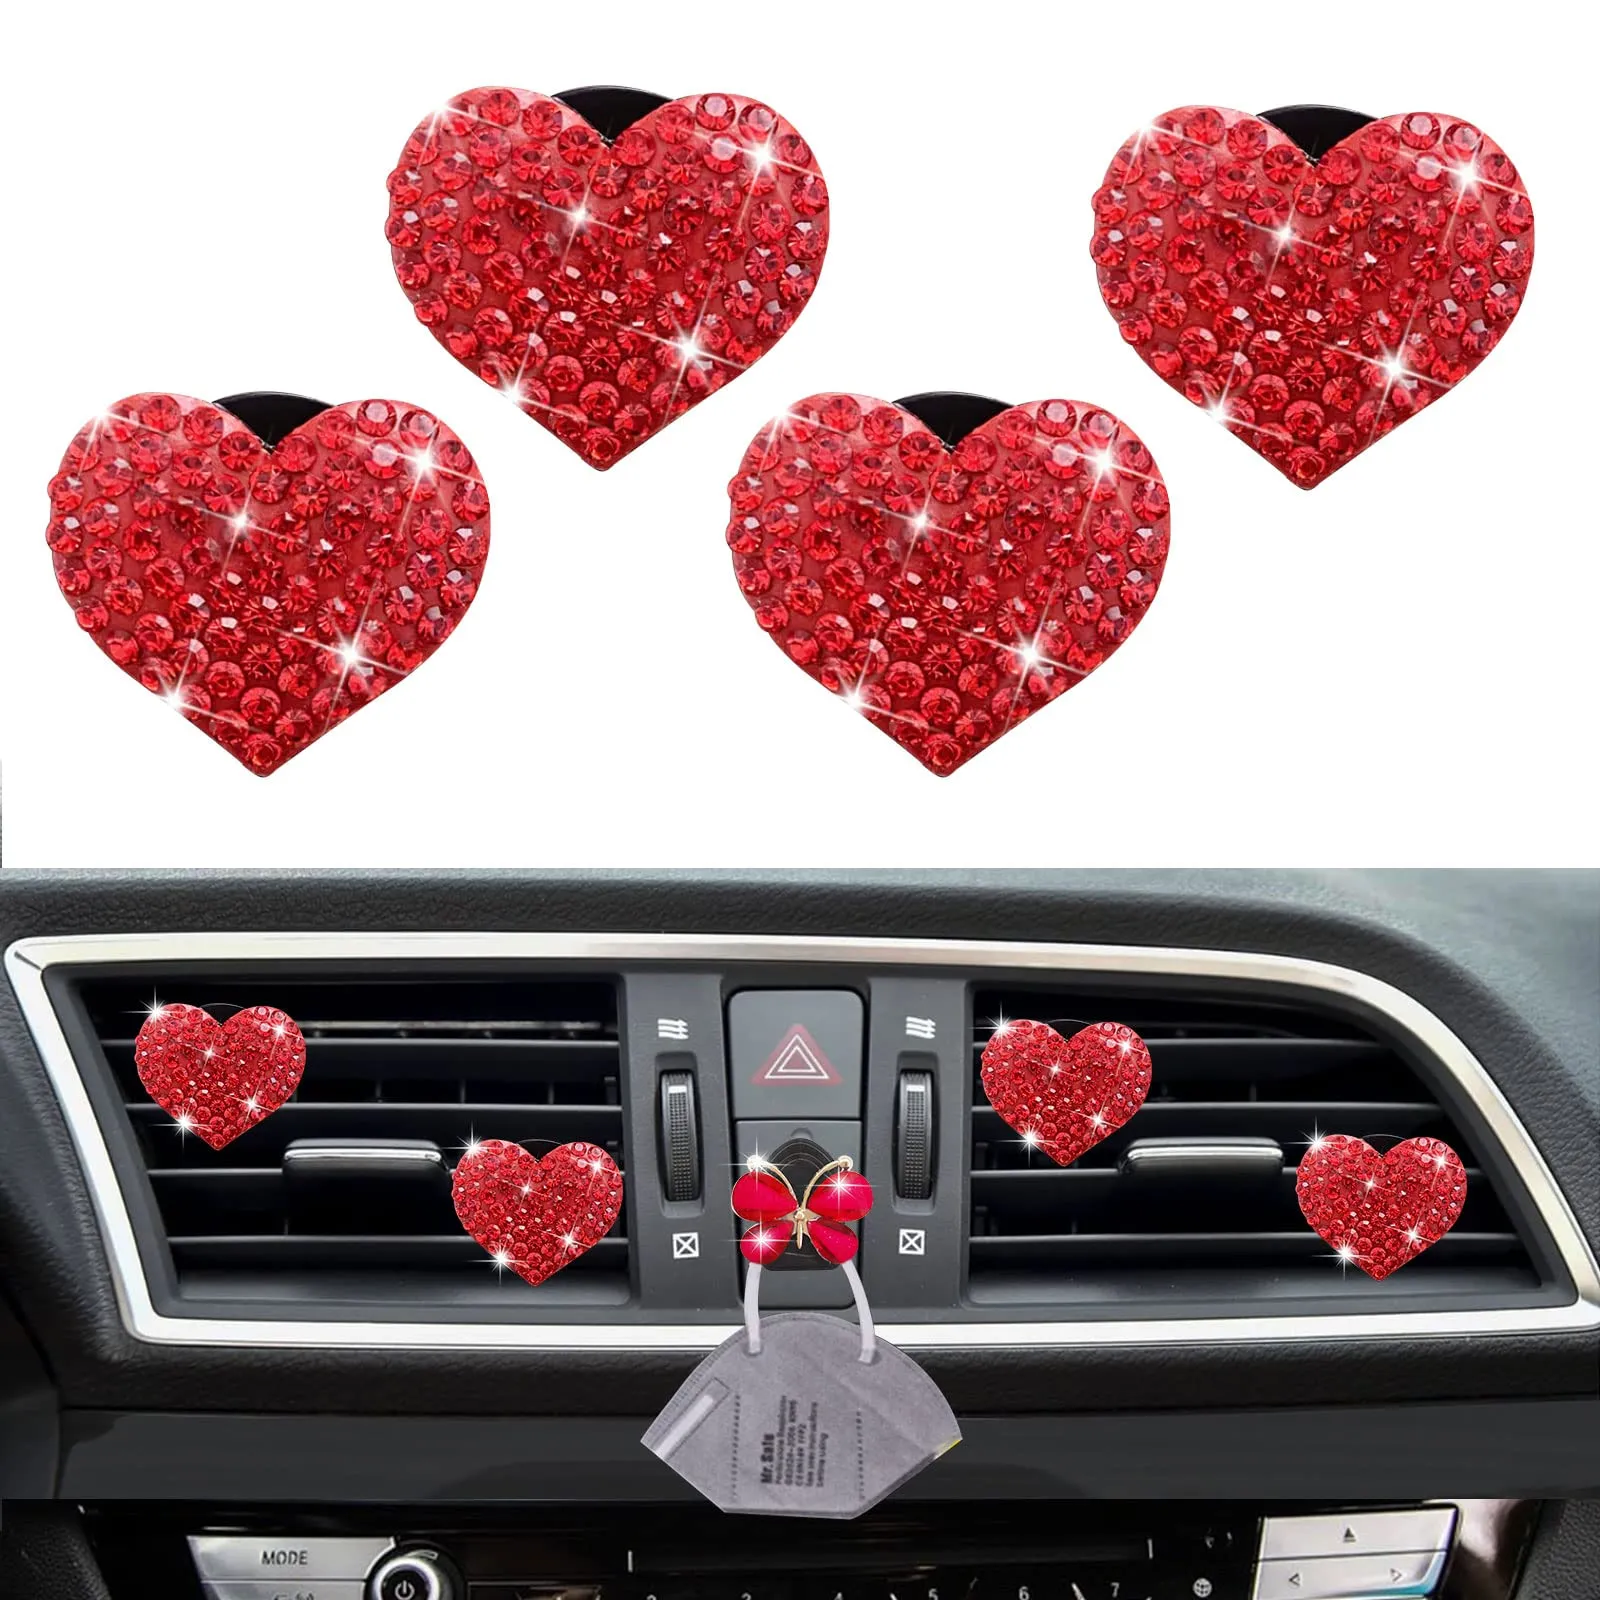 Luchtverfrisser Bling Red Lippen Vent Clips Hartvorm Crystal Car Clip Charms Fanmeners For Women Rhinestone Diffuser Cute de Lulubaby Amjbr